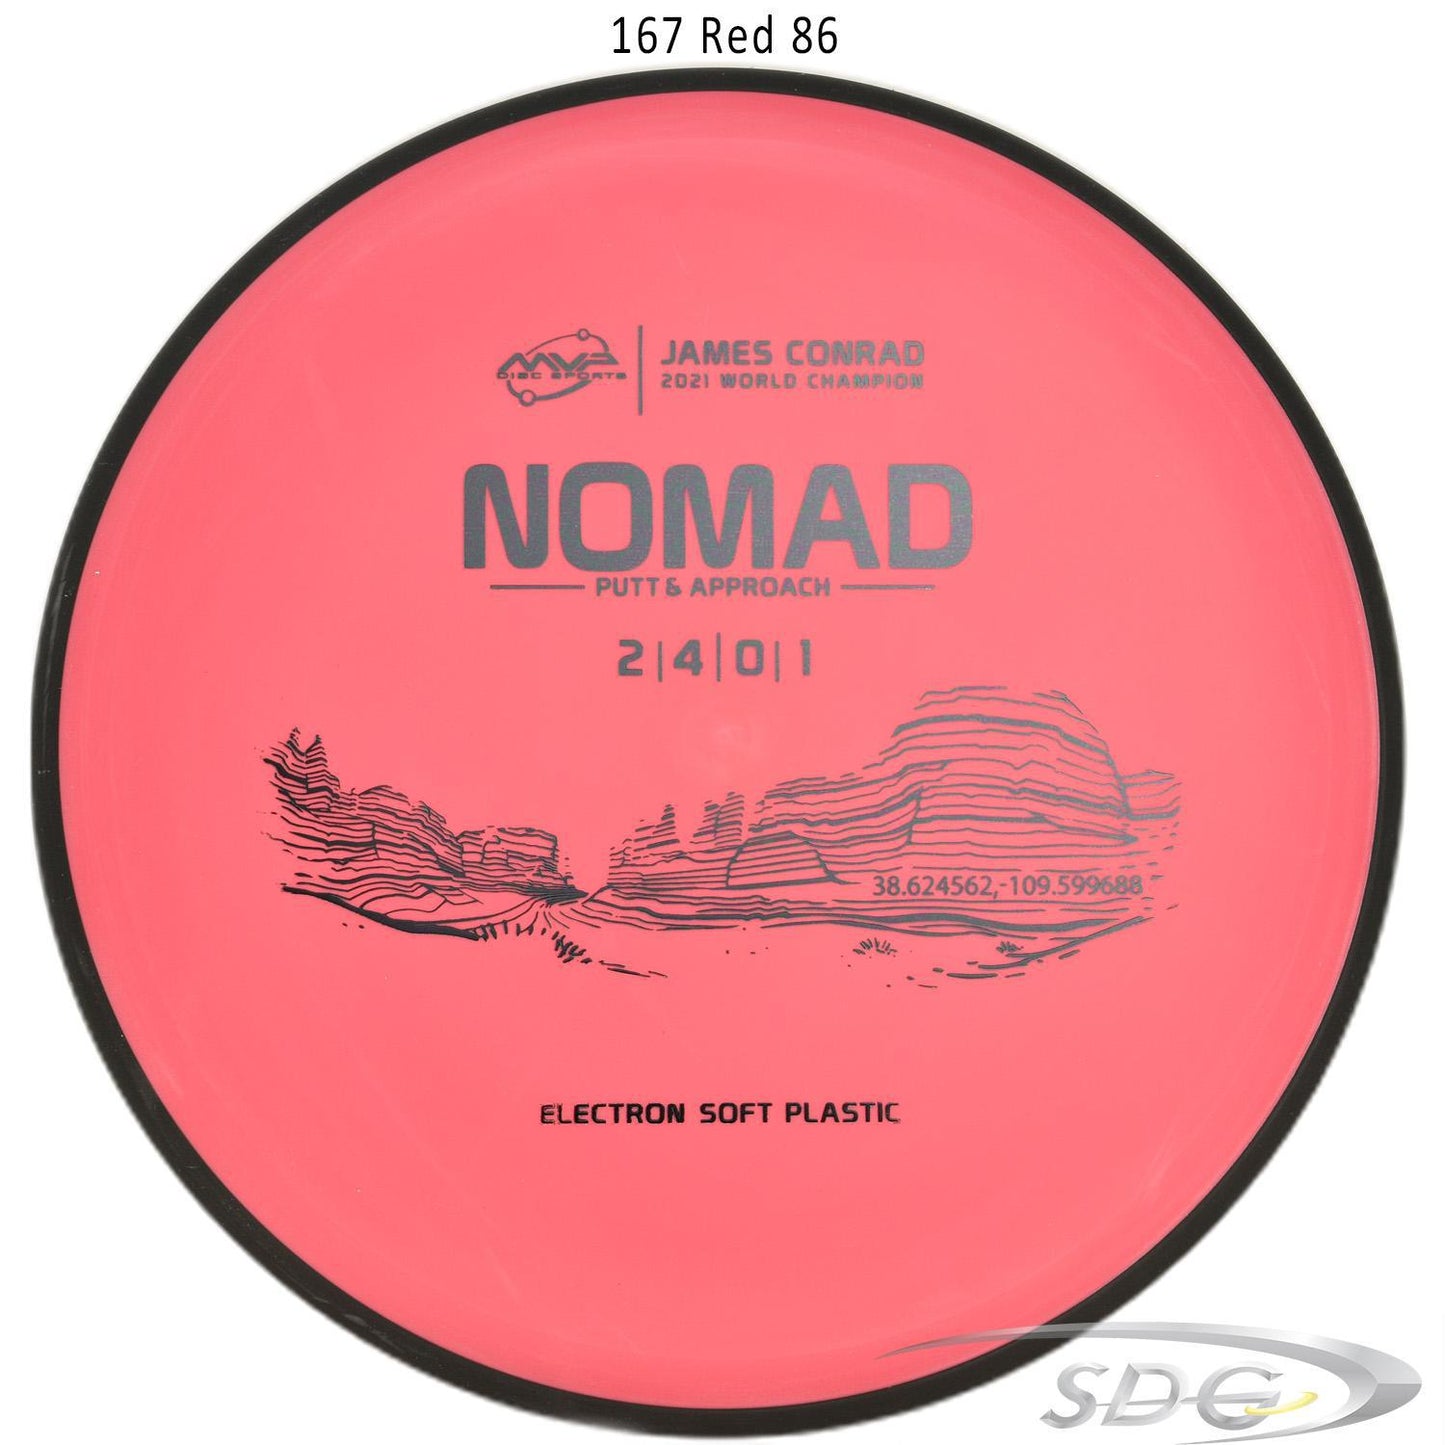 mvp-electron-nomad-soft-james-conrad-edition-disc-golf-putter-1 167 Red 86 